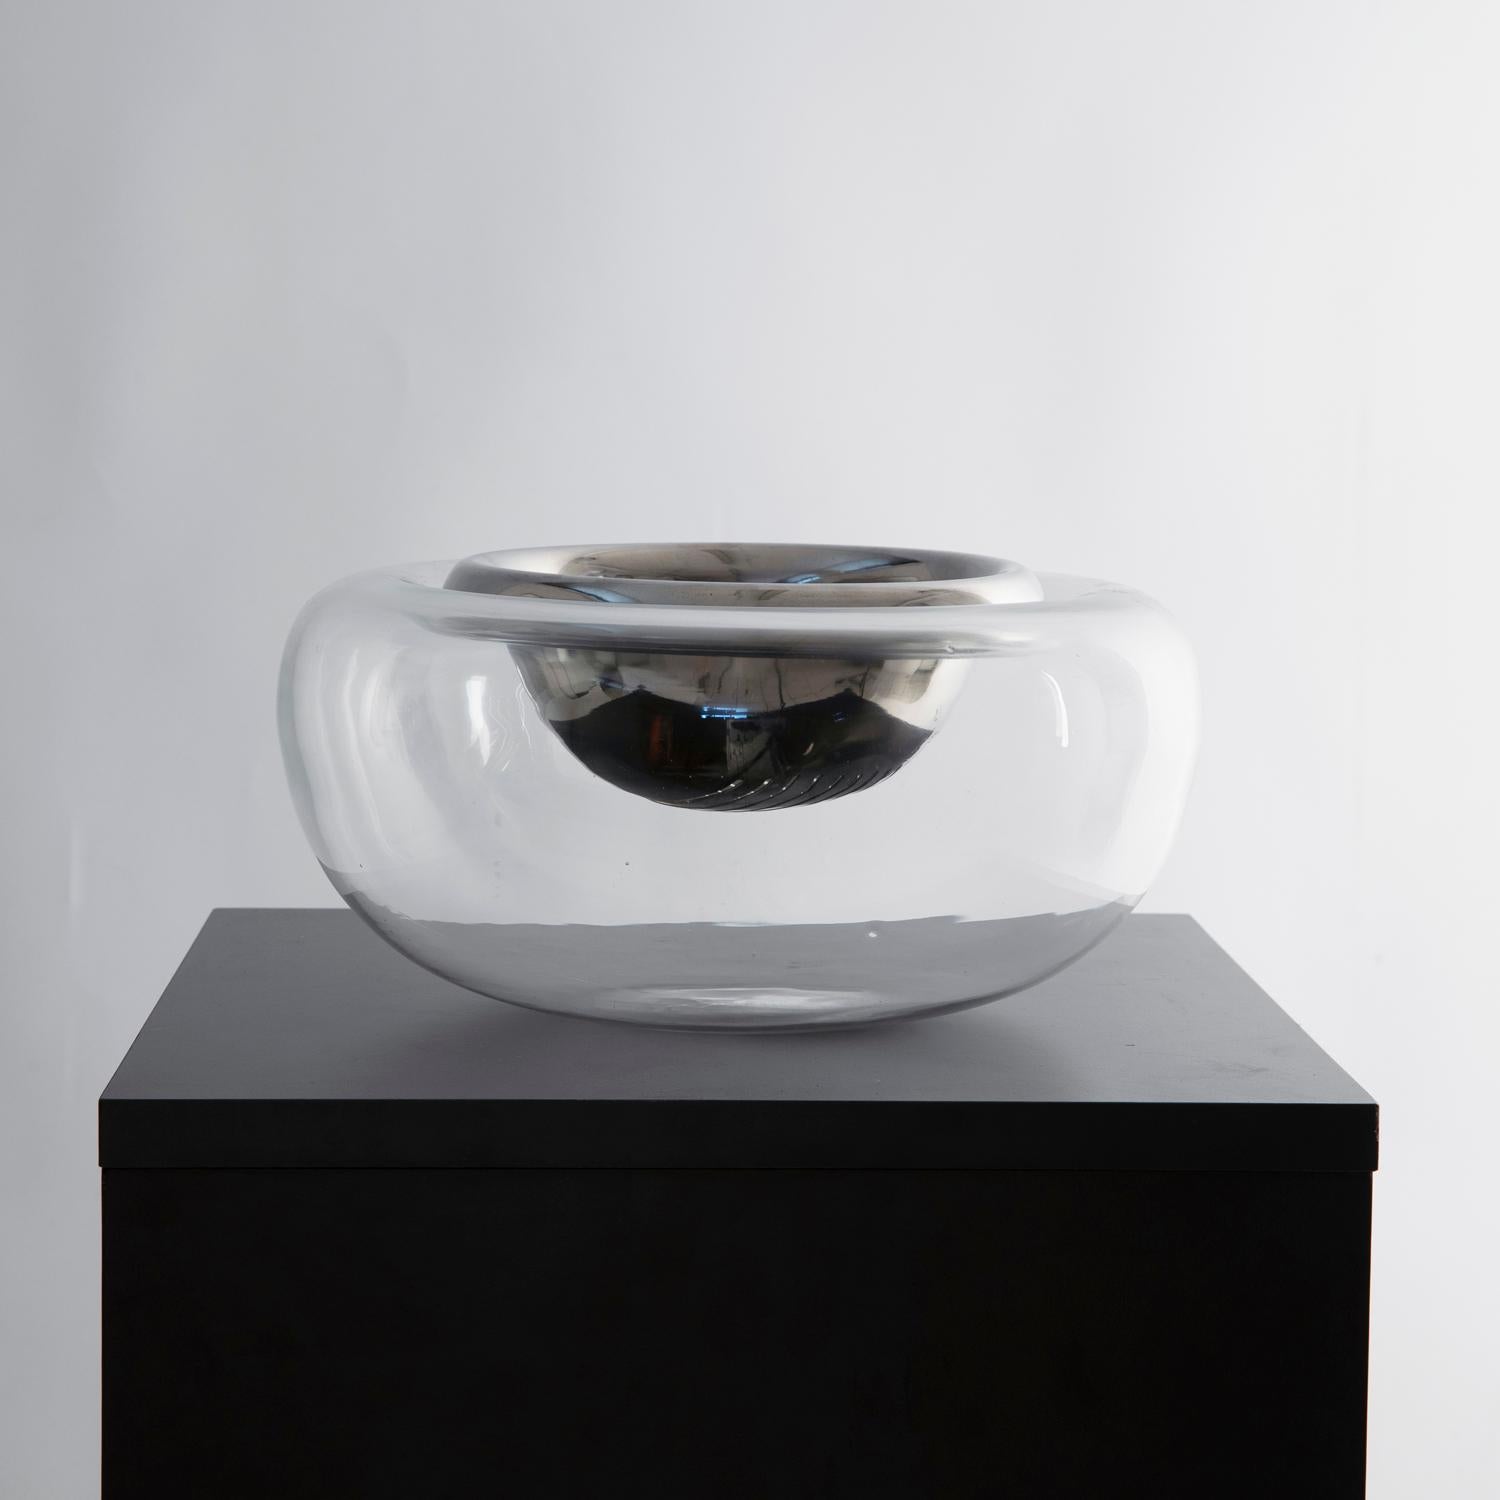 Eleonore Peduzzi Riva for Vistosi, blown glass ice-pail with chrome metal water dripping cup, 1974.